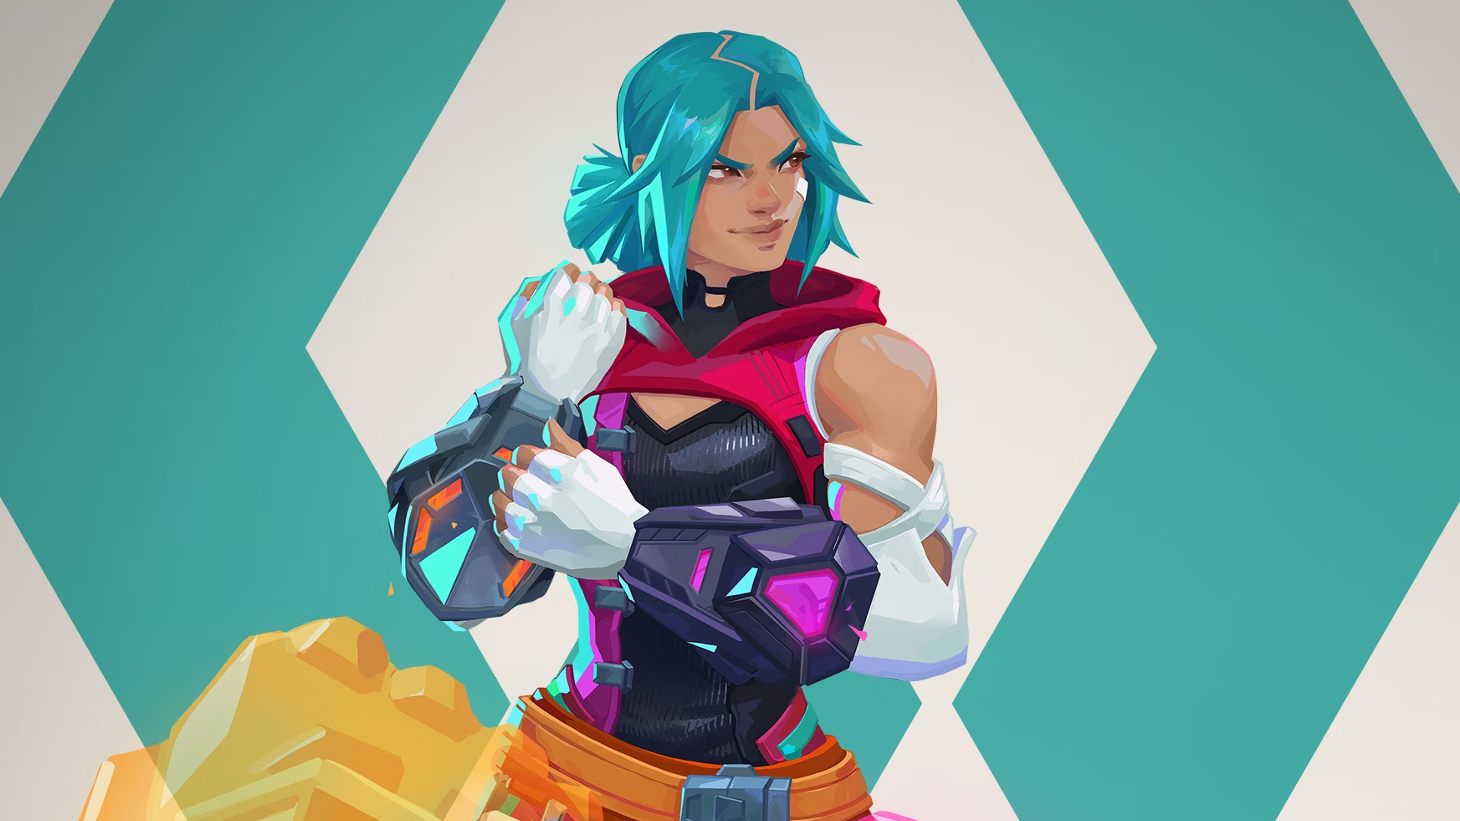 Evercore Heroes Characters: Blink can be seen